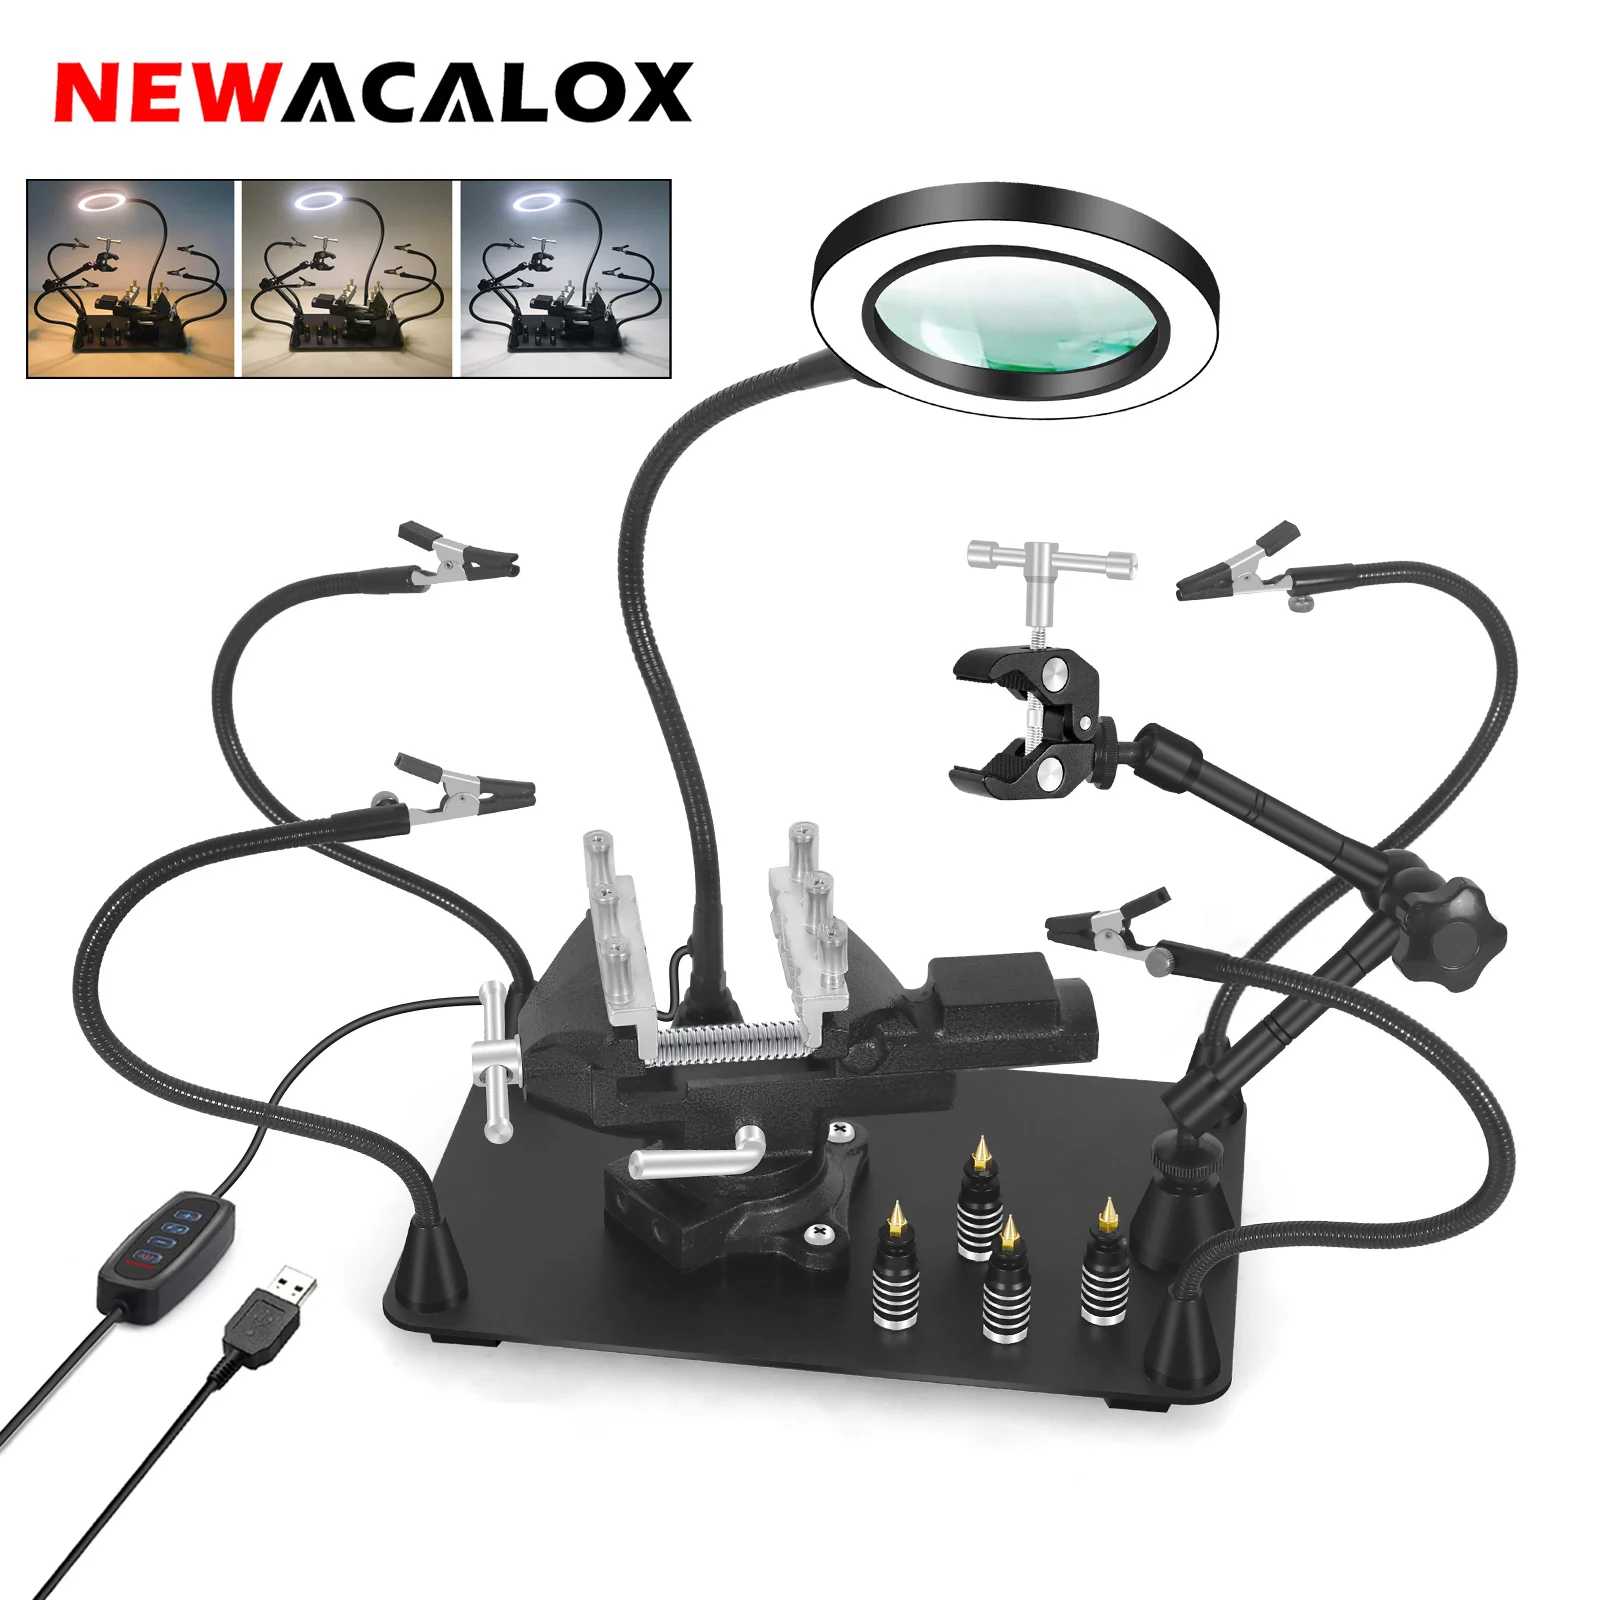 NEWACALOX Magnetic Helping Hands Soldering Third Hand PCB Circuit Board Holder with 5X LED Magnifying Lamp 360 Heat Gun Holder newacalox soldering helping hands third hand tools with large vise base soldering iron tips cleaner ball 3x led magnifying lamp